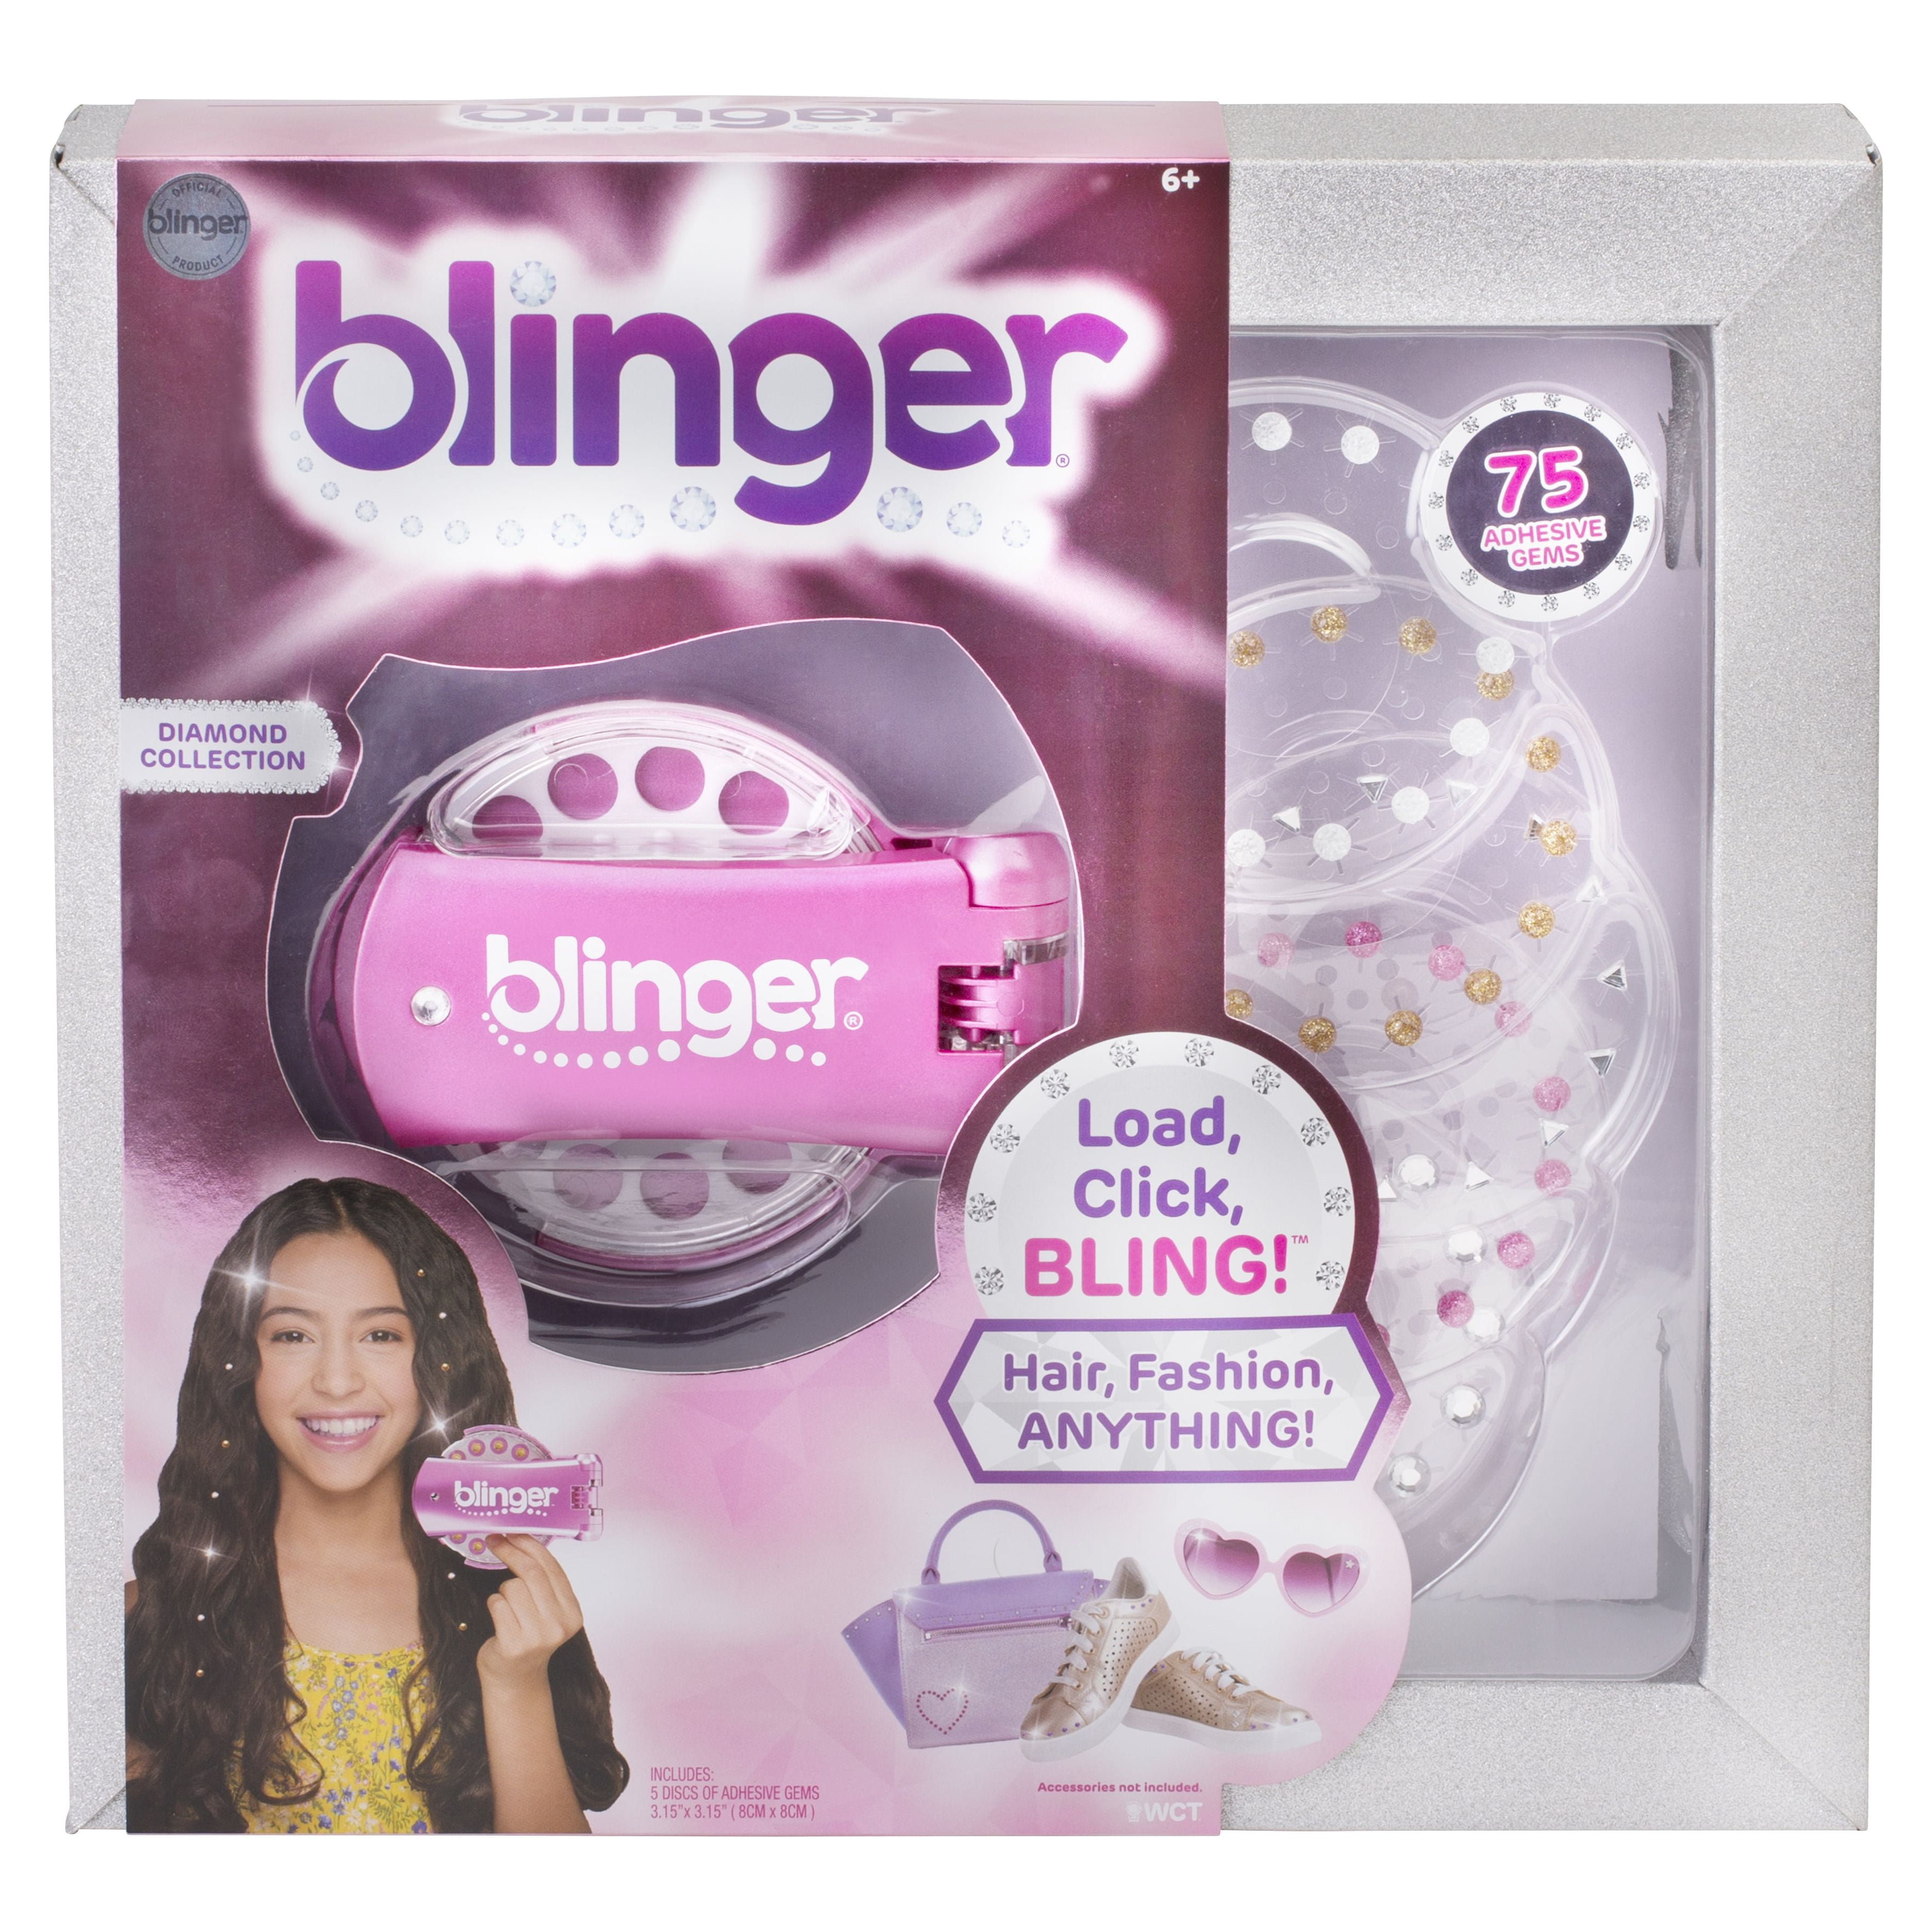 NEW 2 SET OF Blinger 5 Discs 75 Adhesive Gems Sparkle Collection